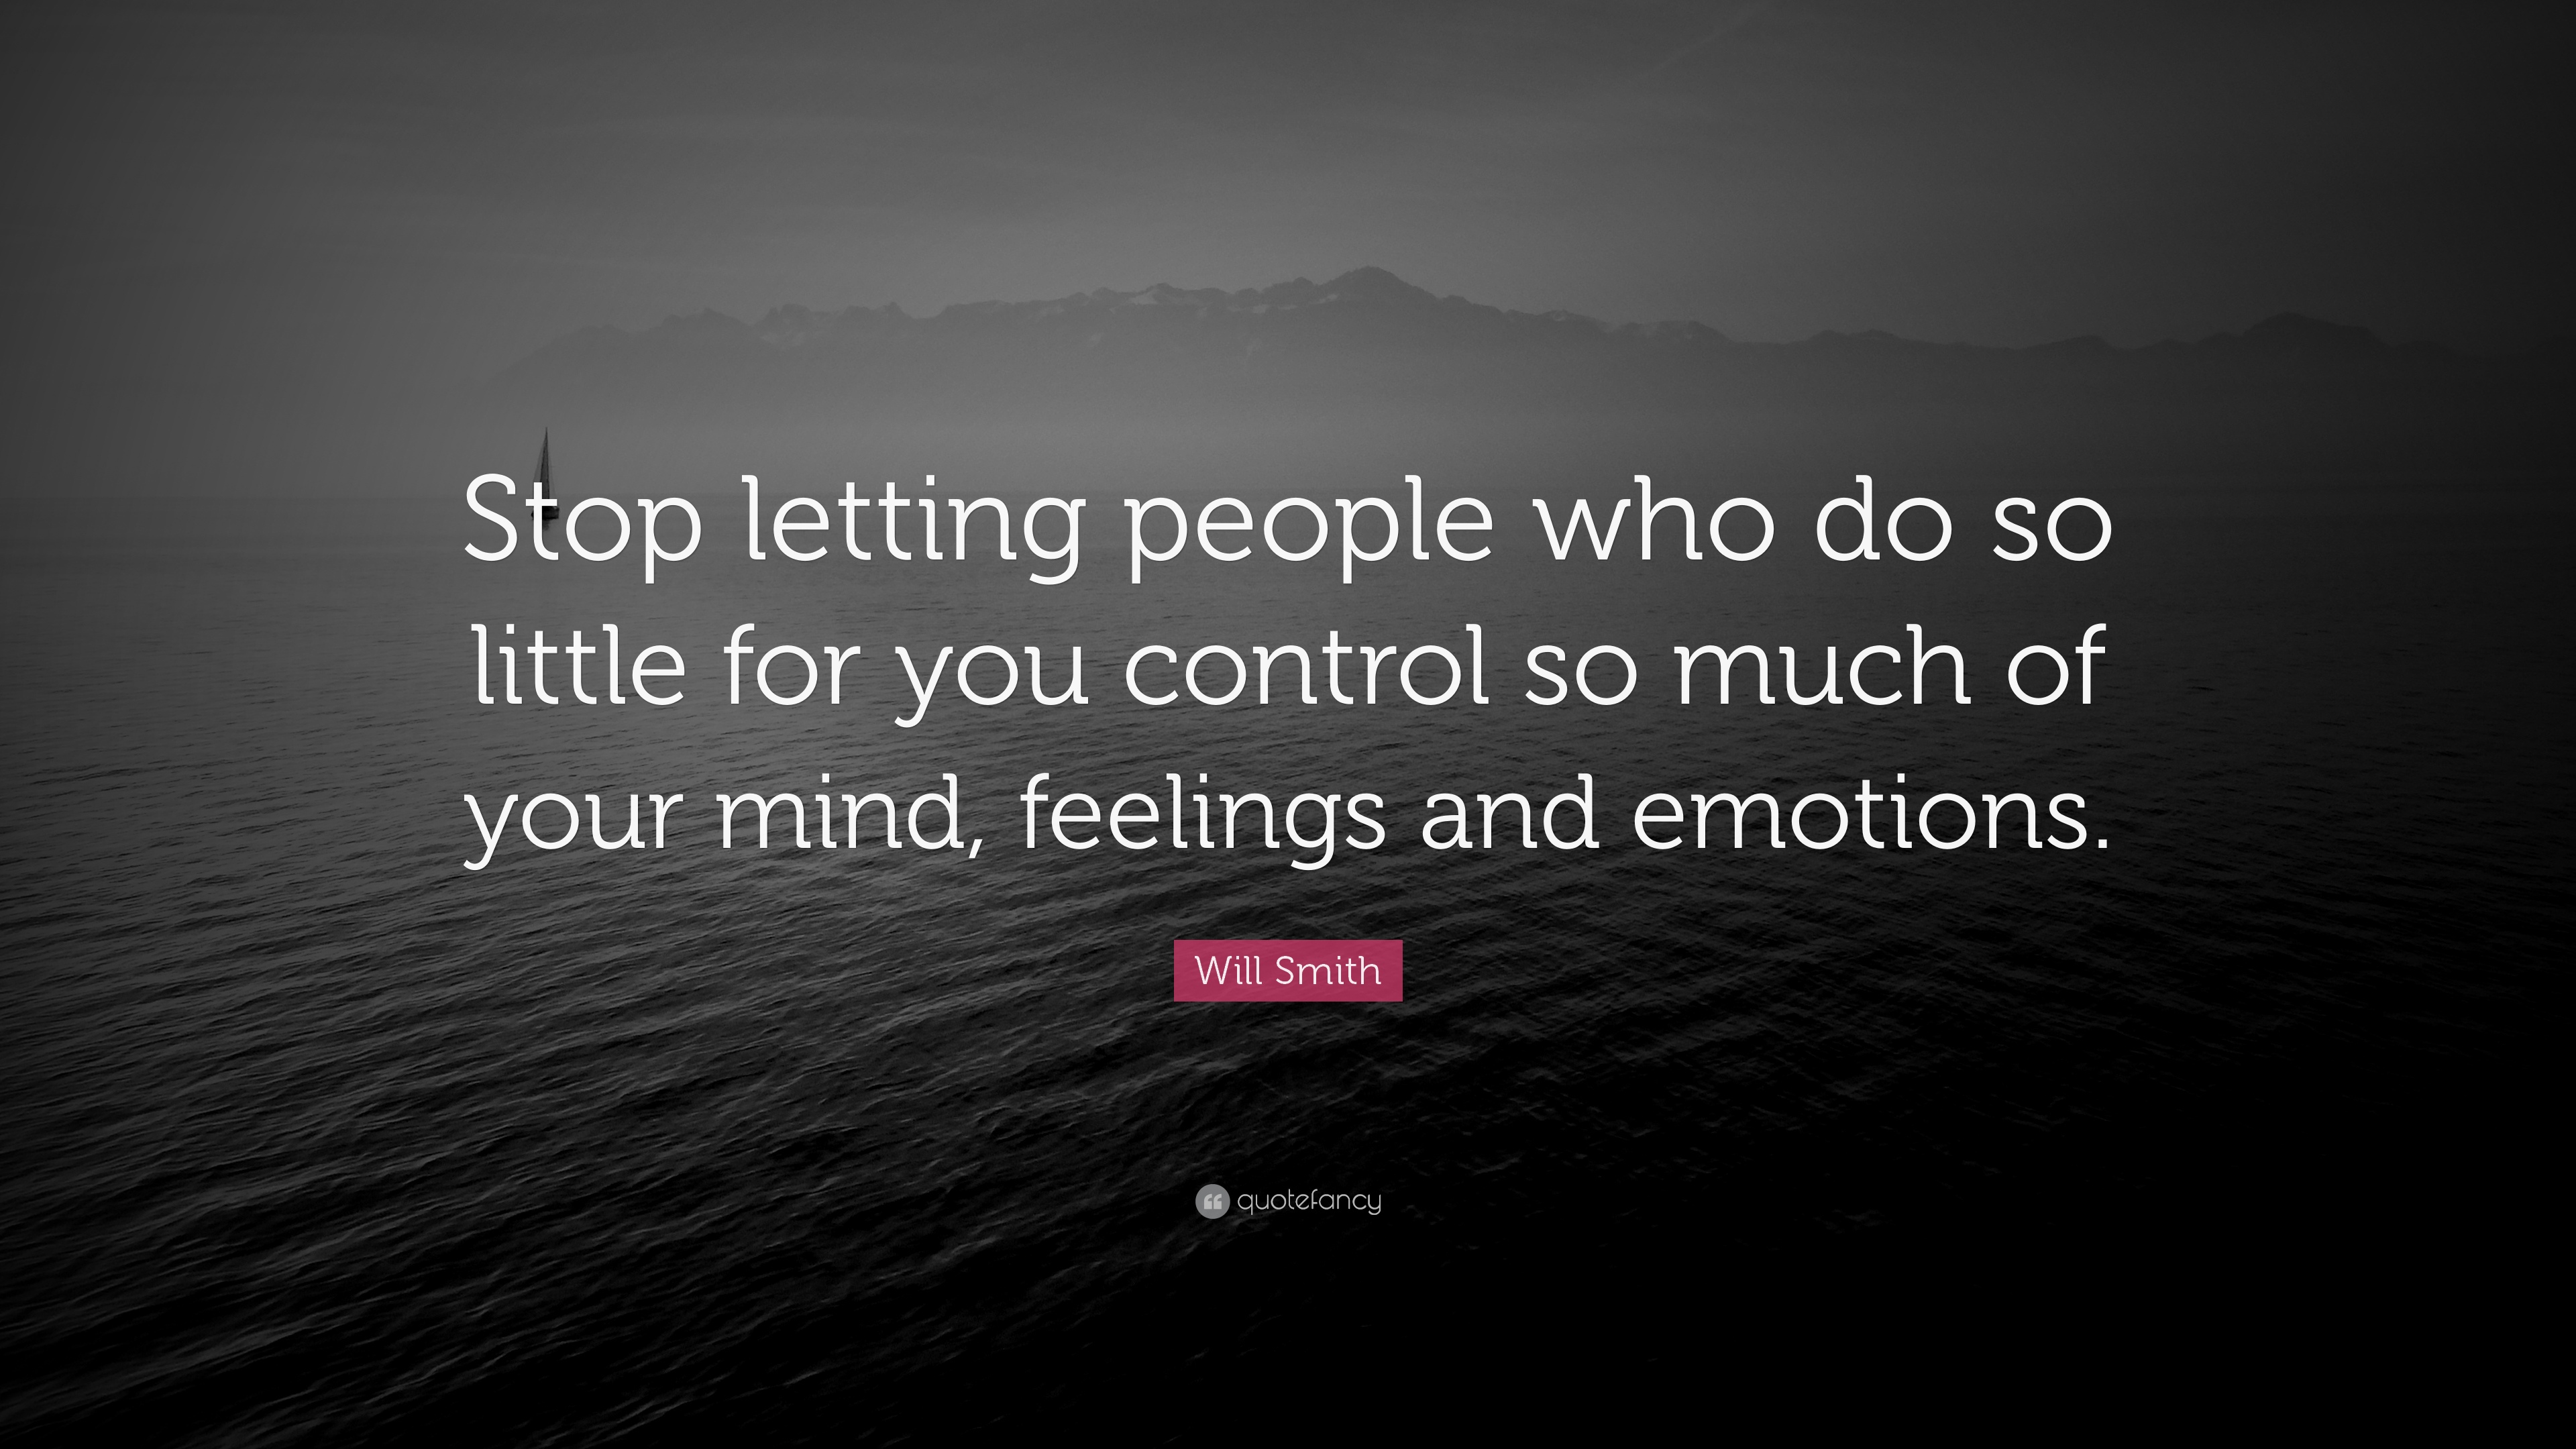 Will Smith Quote: “Stop letting people who do so little for you ...